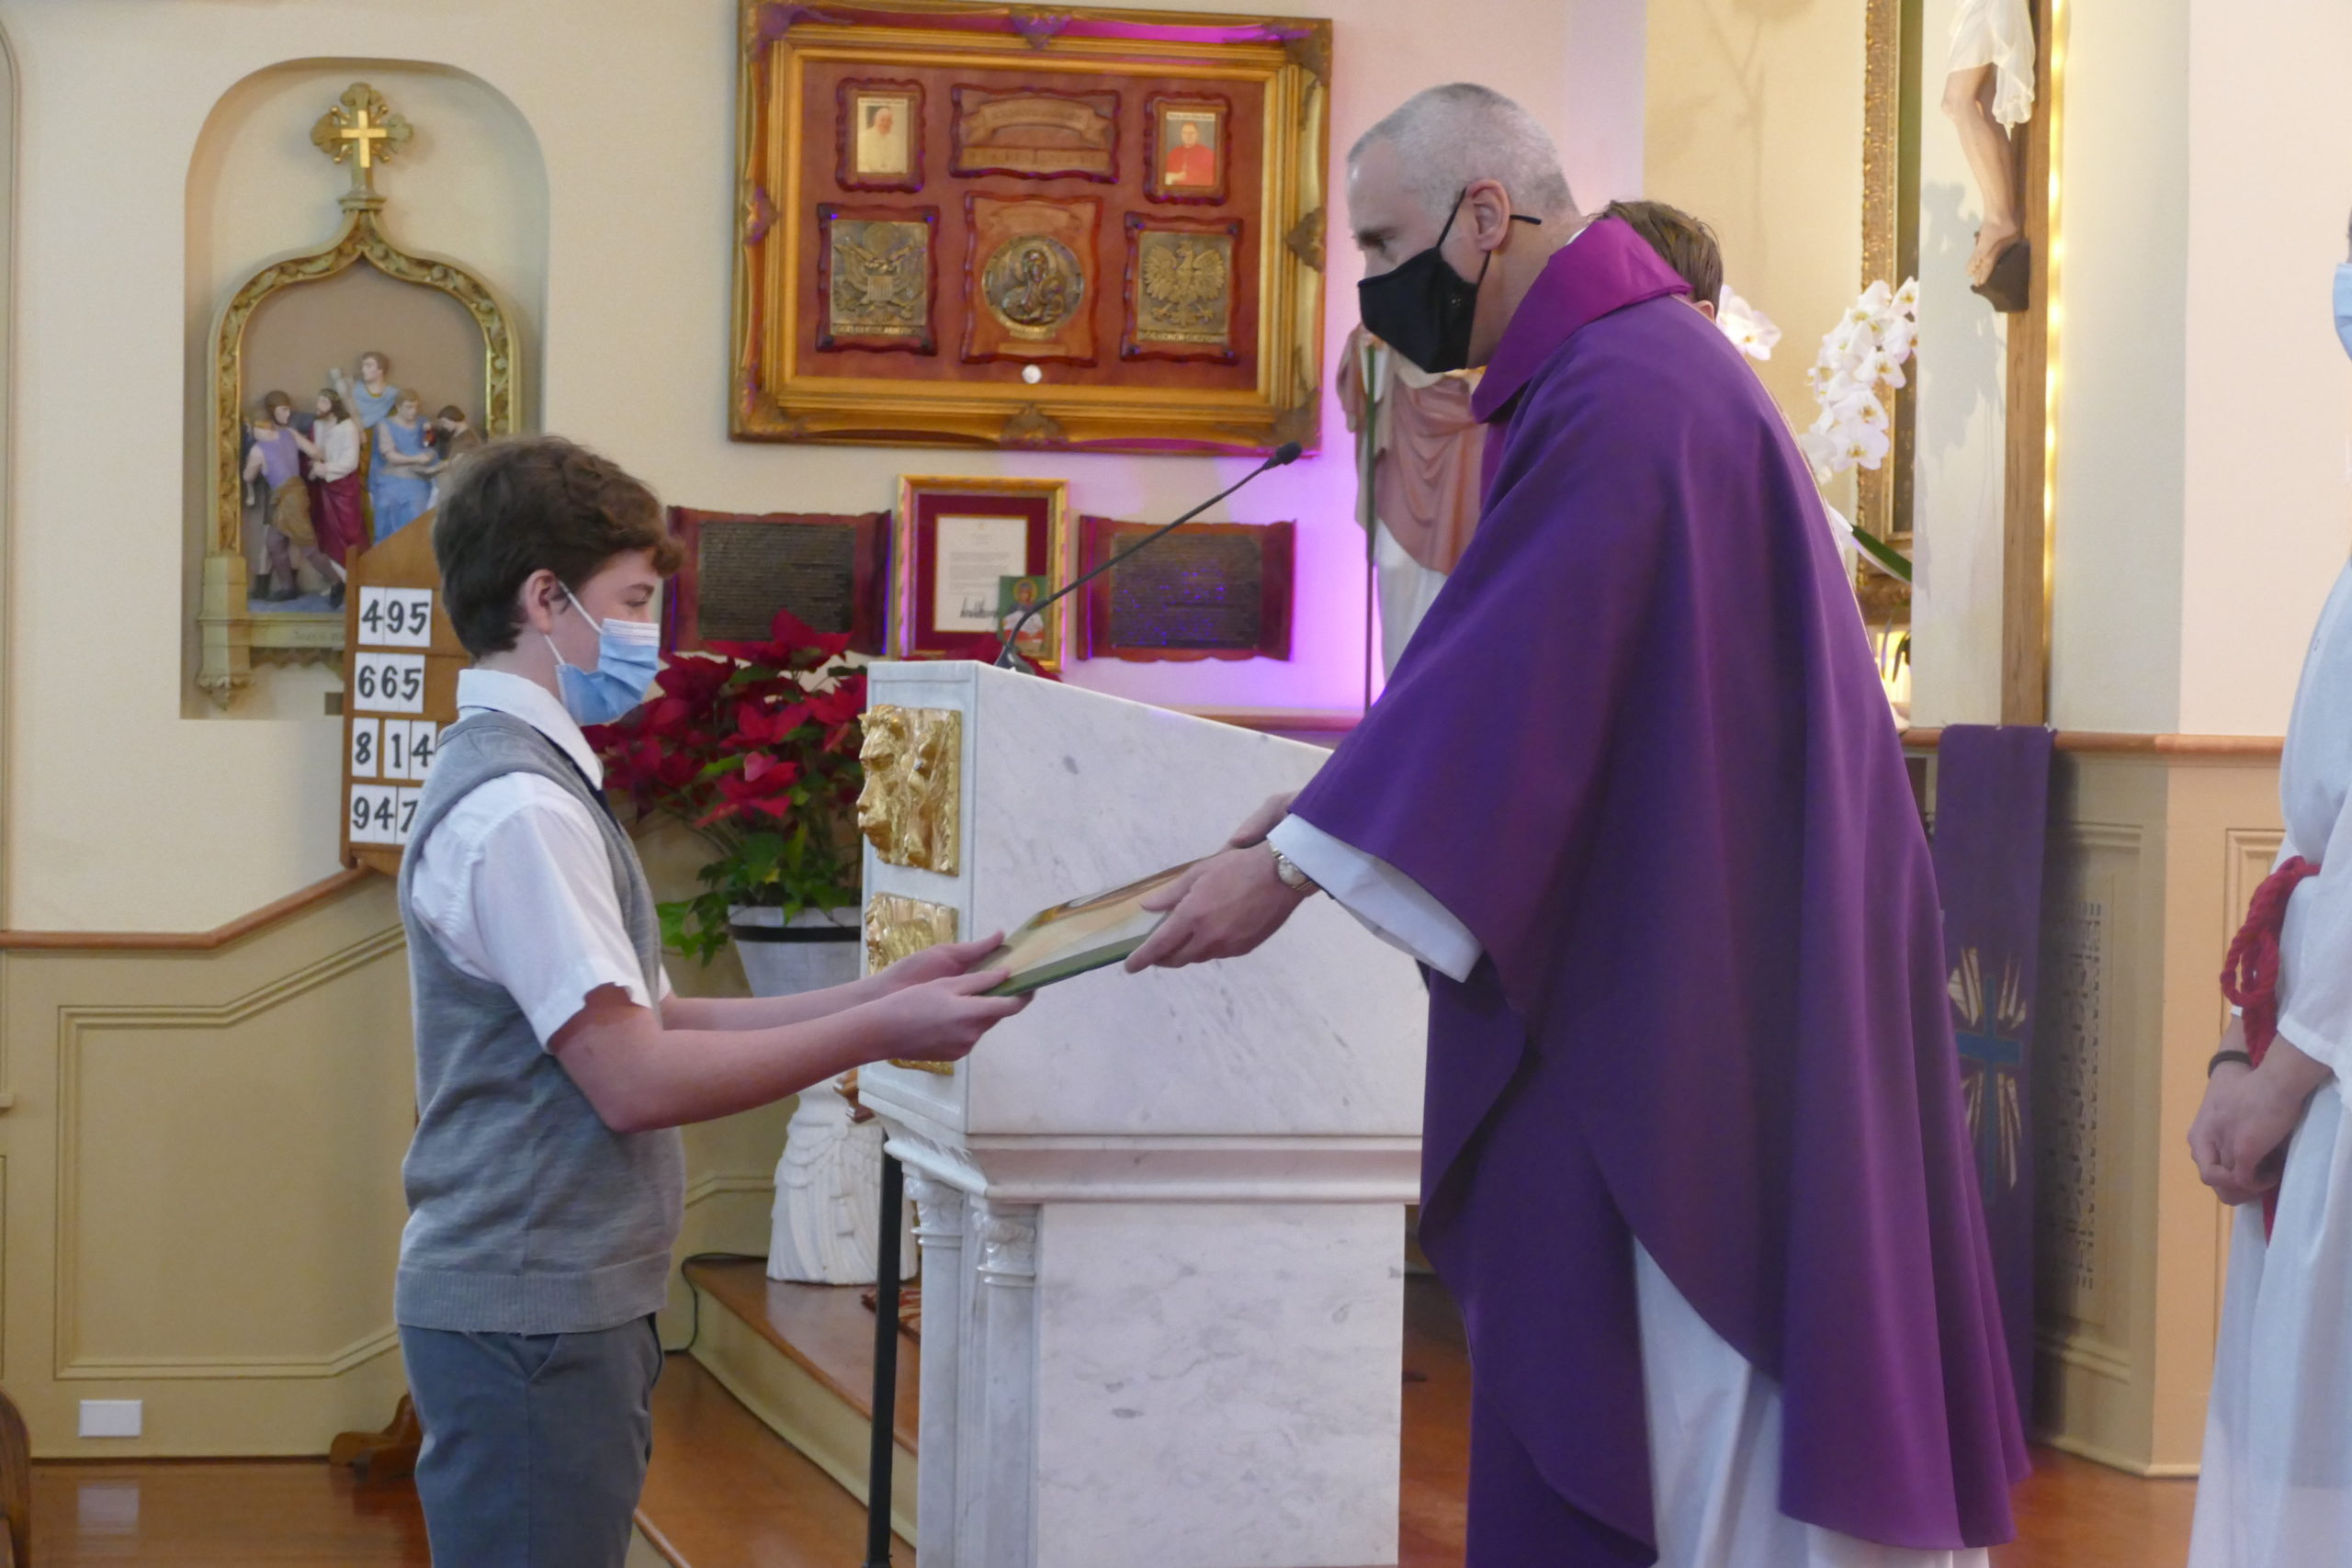 OLH Prep 8 student Jack Cantwell presents one of the offertory gifts to Father Maddaloni at the Lenten liturgy